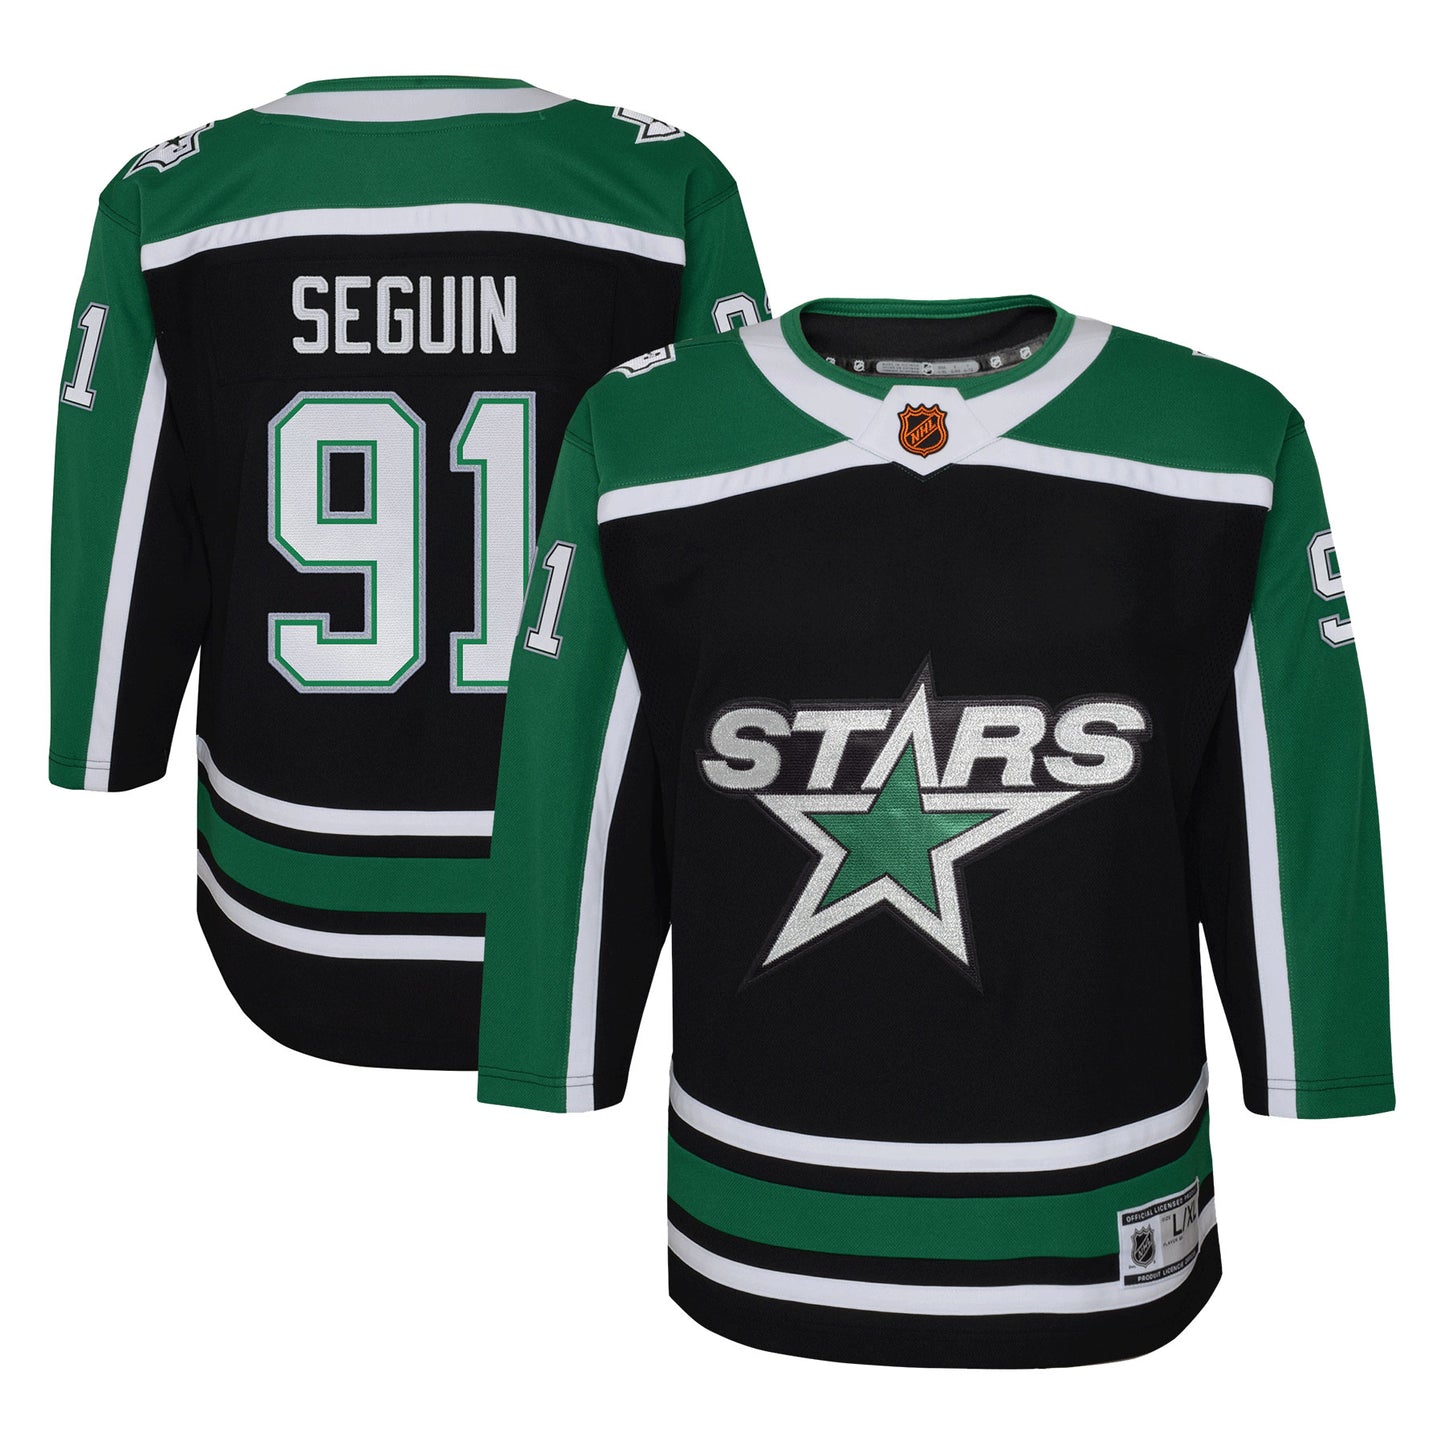 Tyler Seguin Dallas Stars Youth Special Edition 2.0 Premier Player Jersey - Black